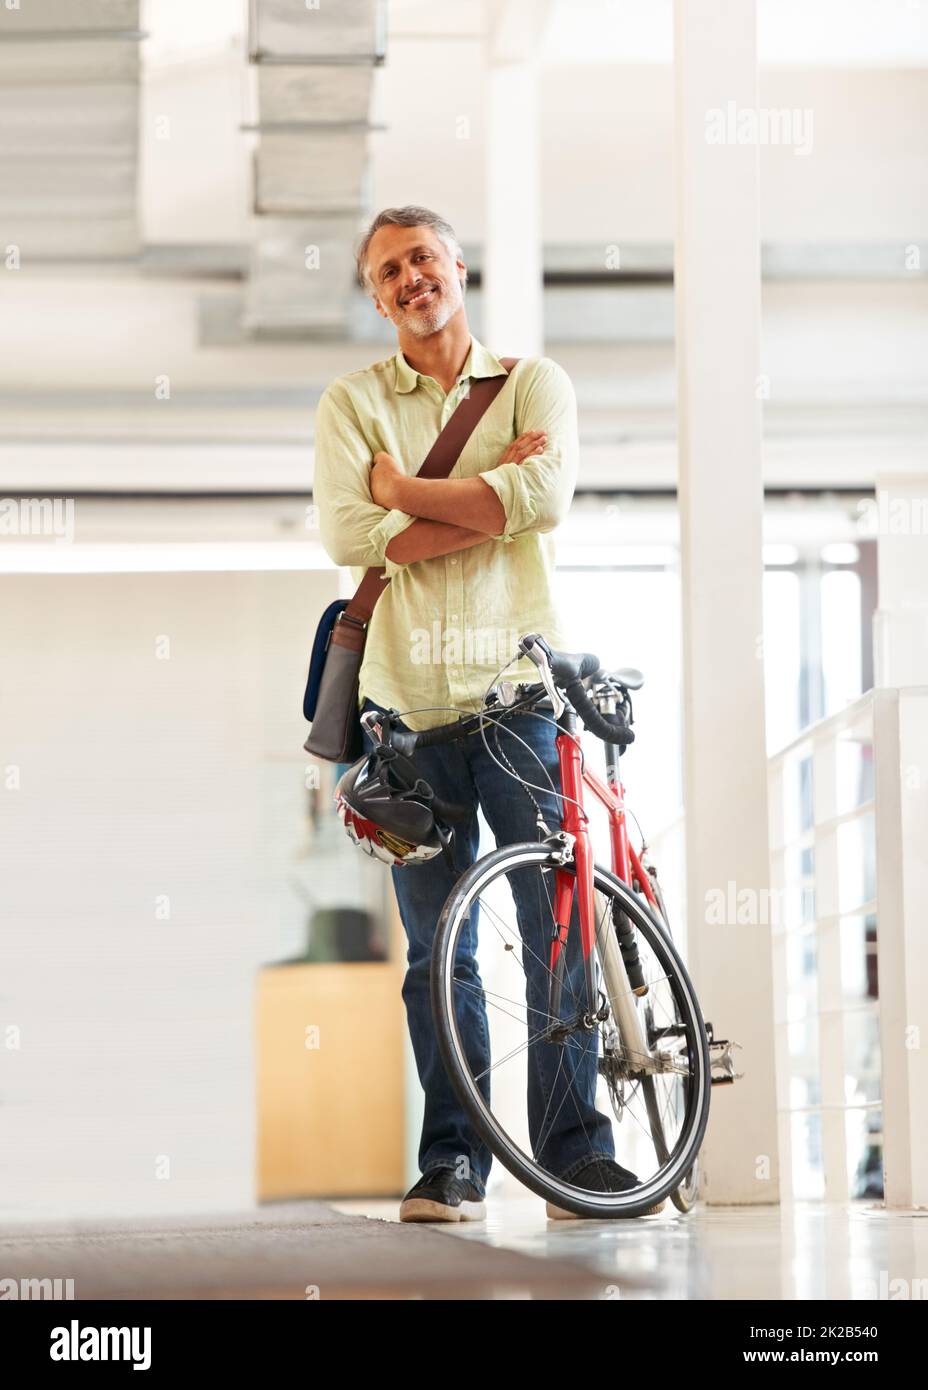 Making the days deliveries. Full length shot of a handsome bike messenger in an office. Stock Photo